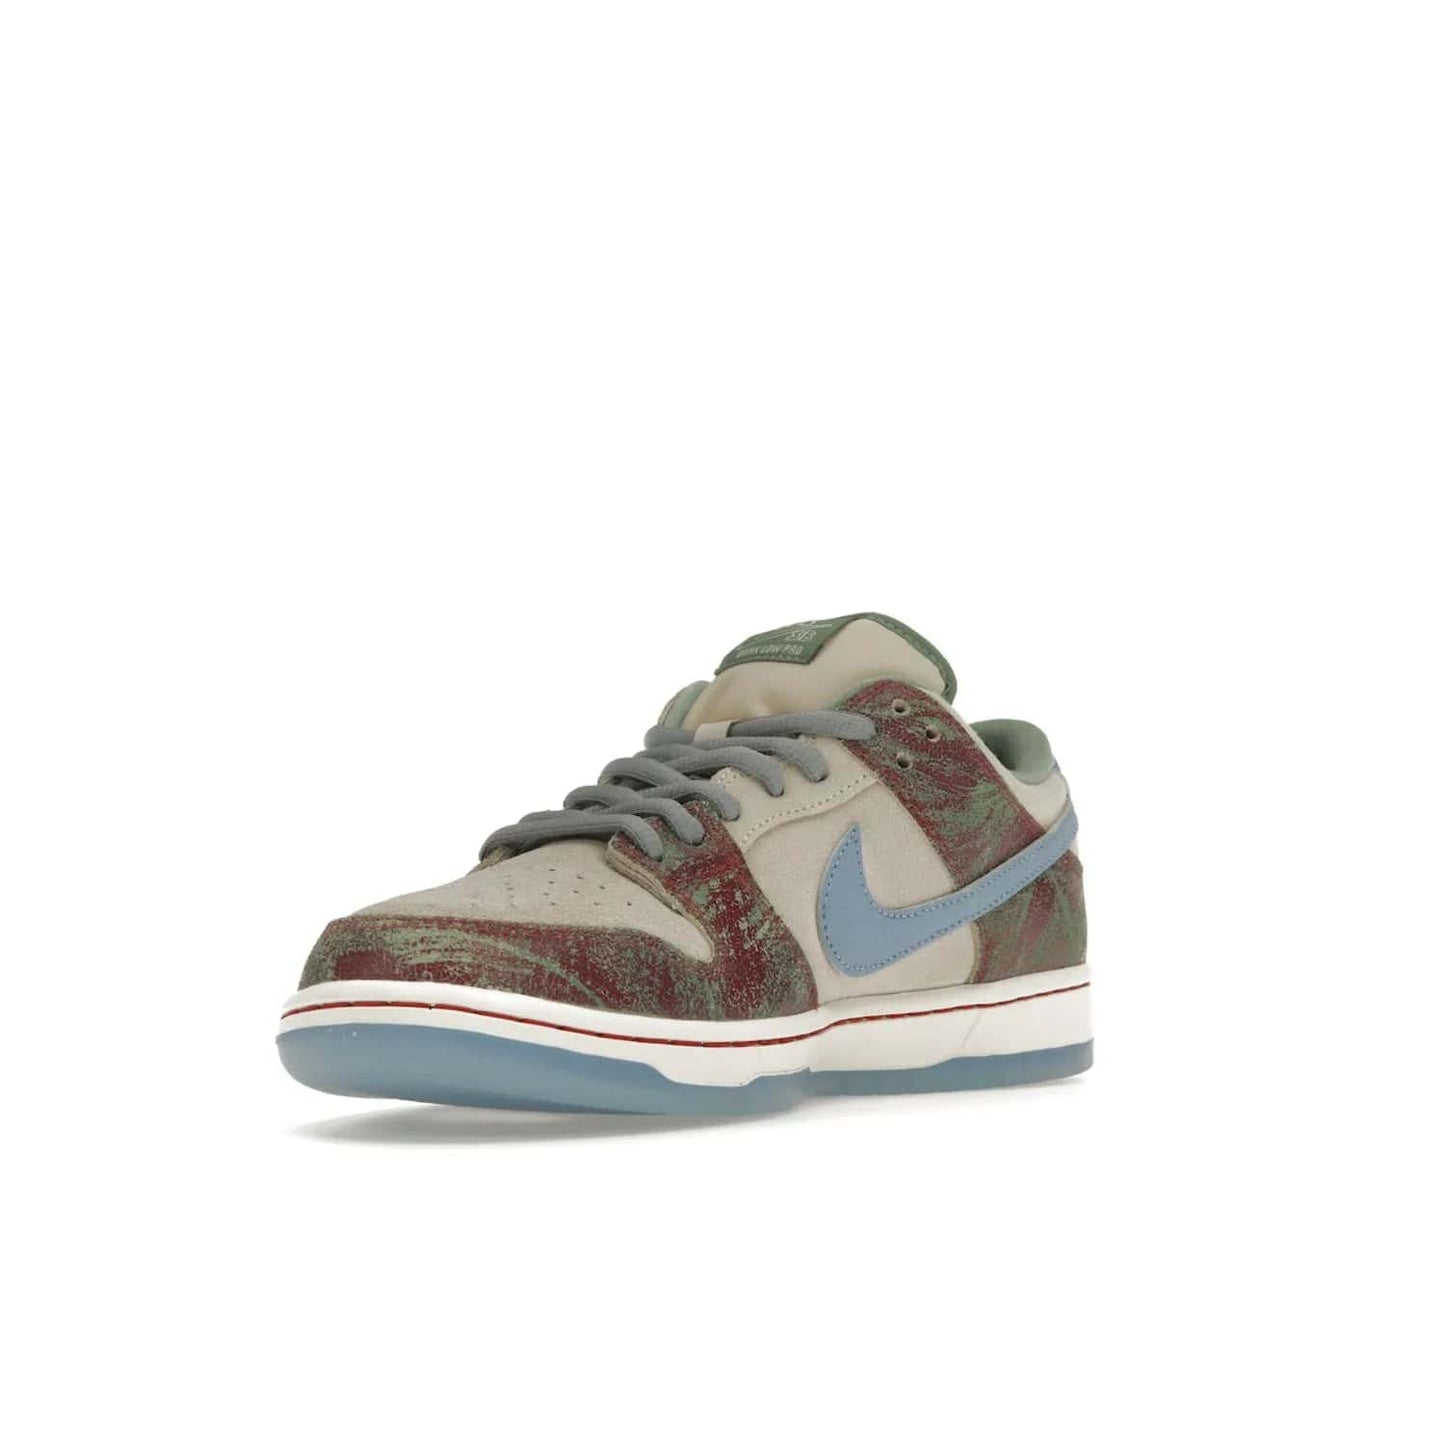 Nike SB Dunk Low Crenshaw Skate Club - Image 14 - Only at www.BallersClubKickz.com - Introducing the Nike SB Dunk Low Crenshaw Skate Club! Classic skate shoes with Sail and Light Blue upper, Cedar accents, padded collars and superior grip for comfortable, stable performance and style. Ideal for any skate session.